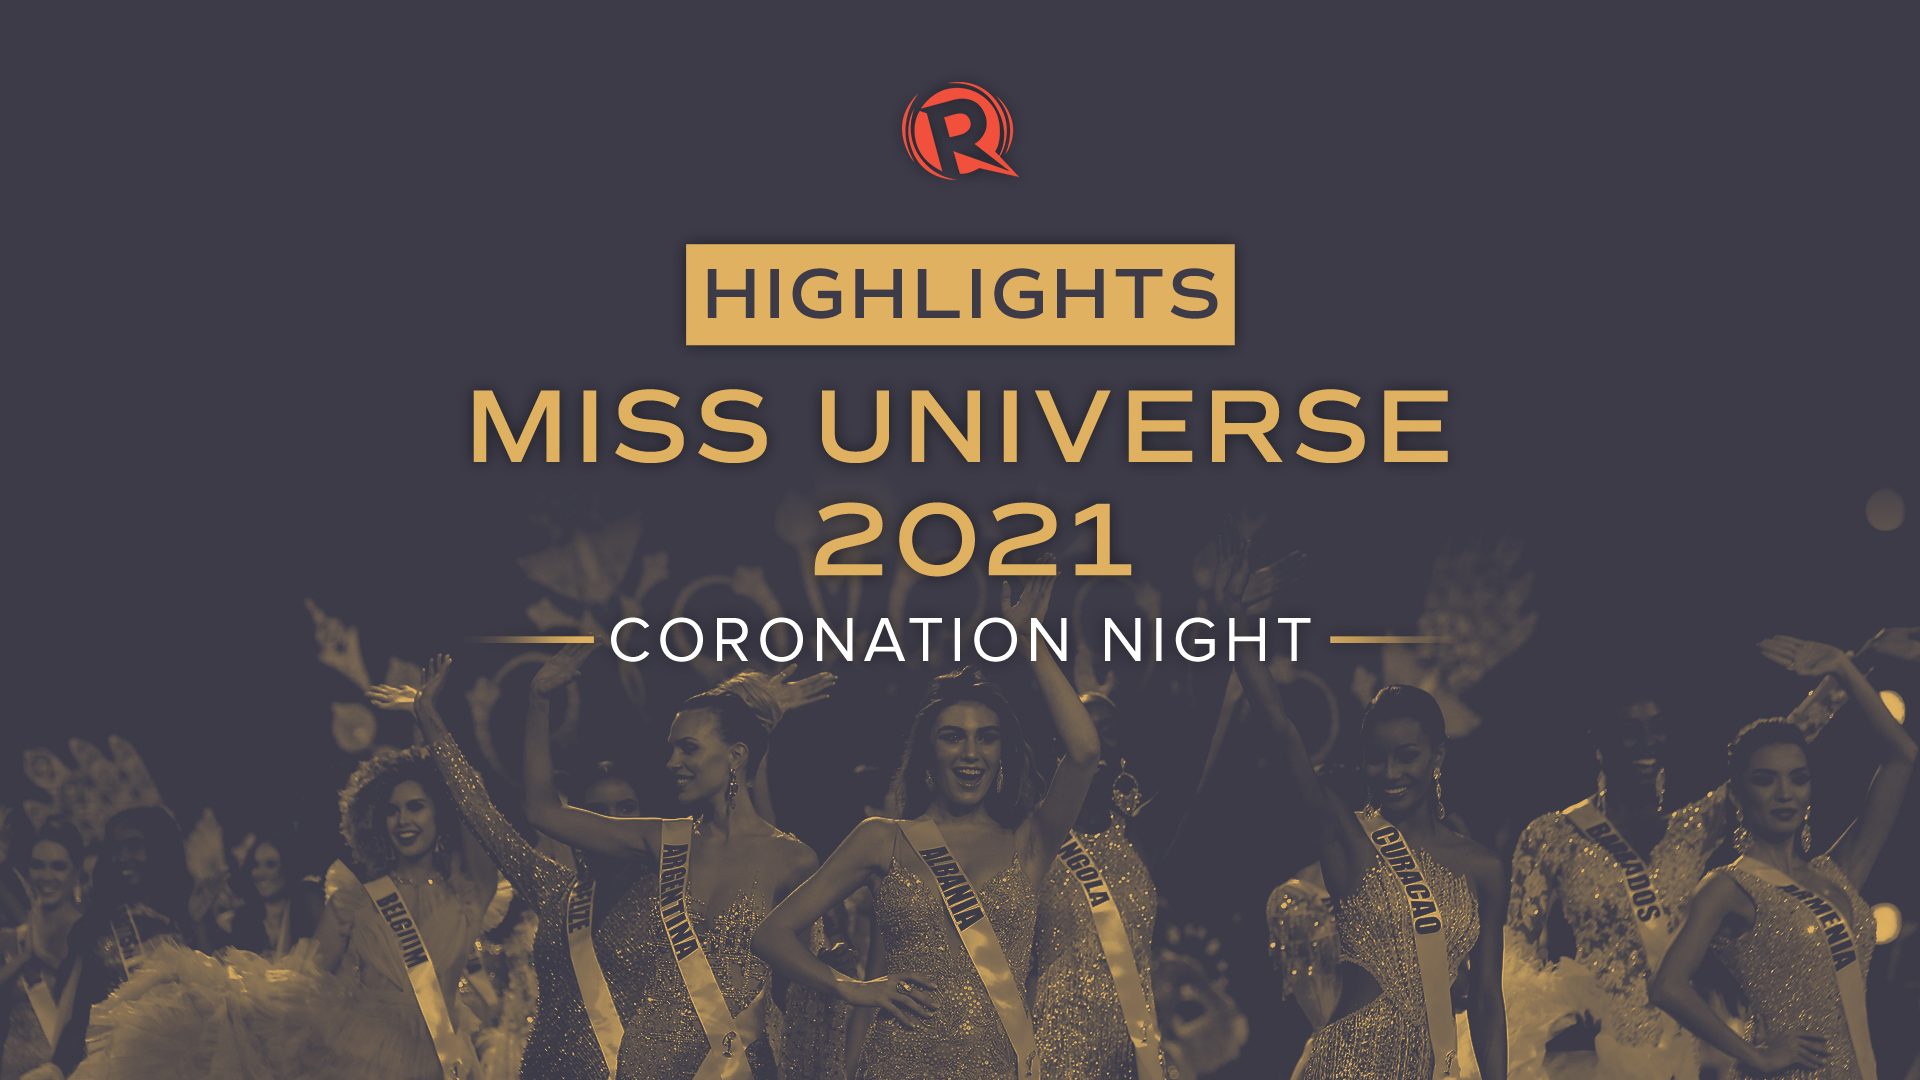 Schedule miss universe 2021 The 70th